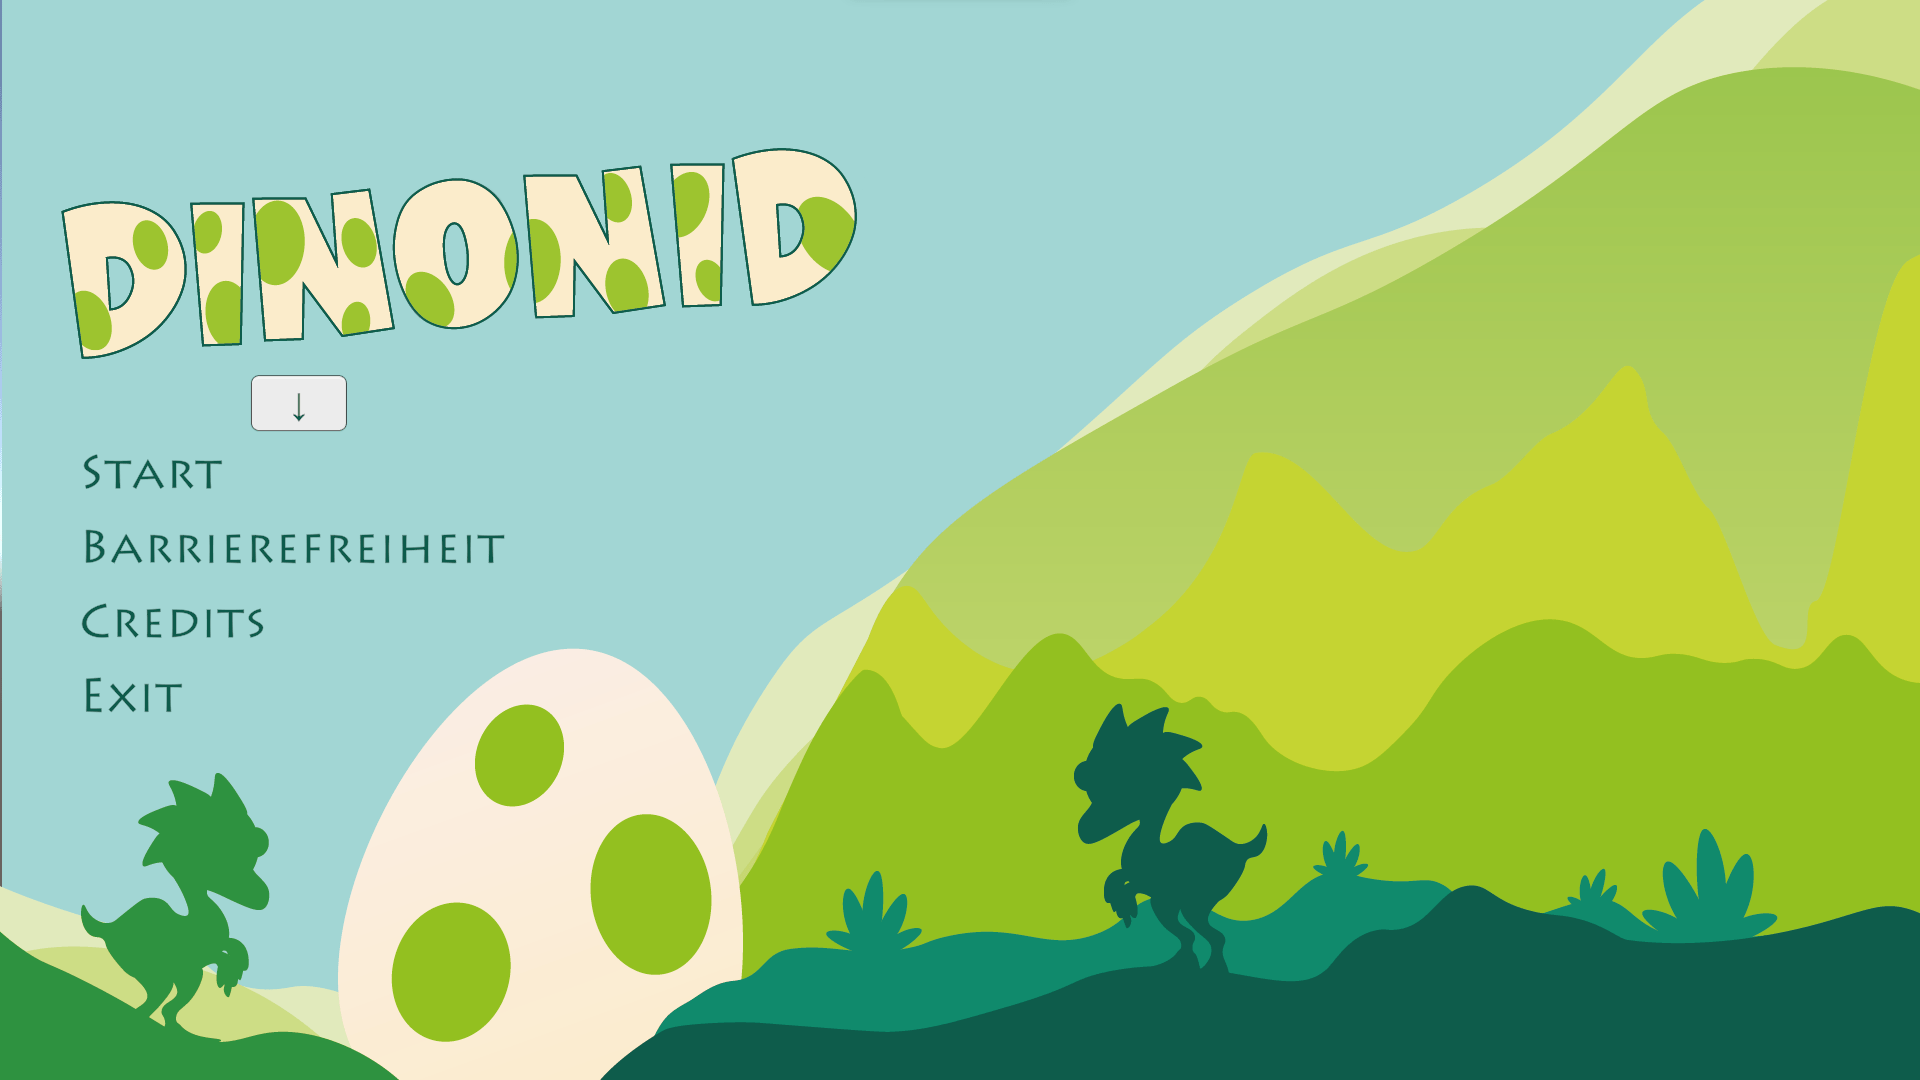 The game menu of Dinonid. In the background, there are two dino silhouettes, seperated by a giant egg. The menu shows the game options "Start, Accessibility, Credits and Exit" in German.